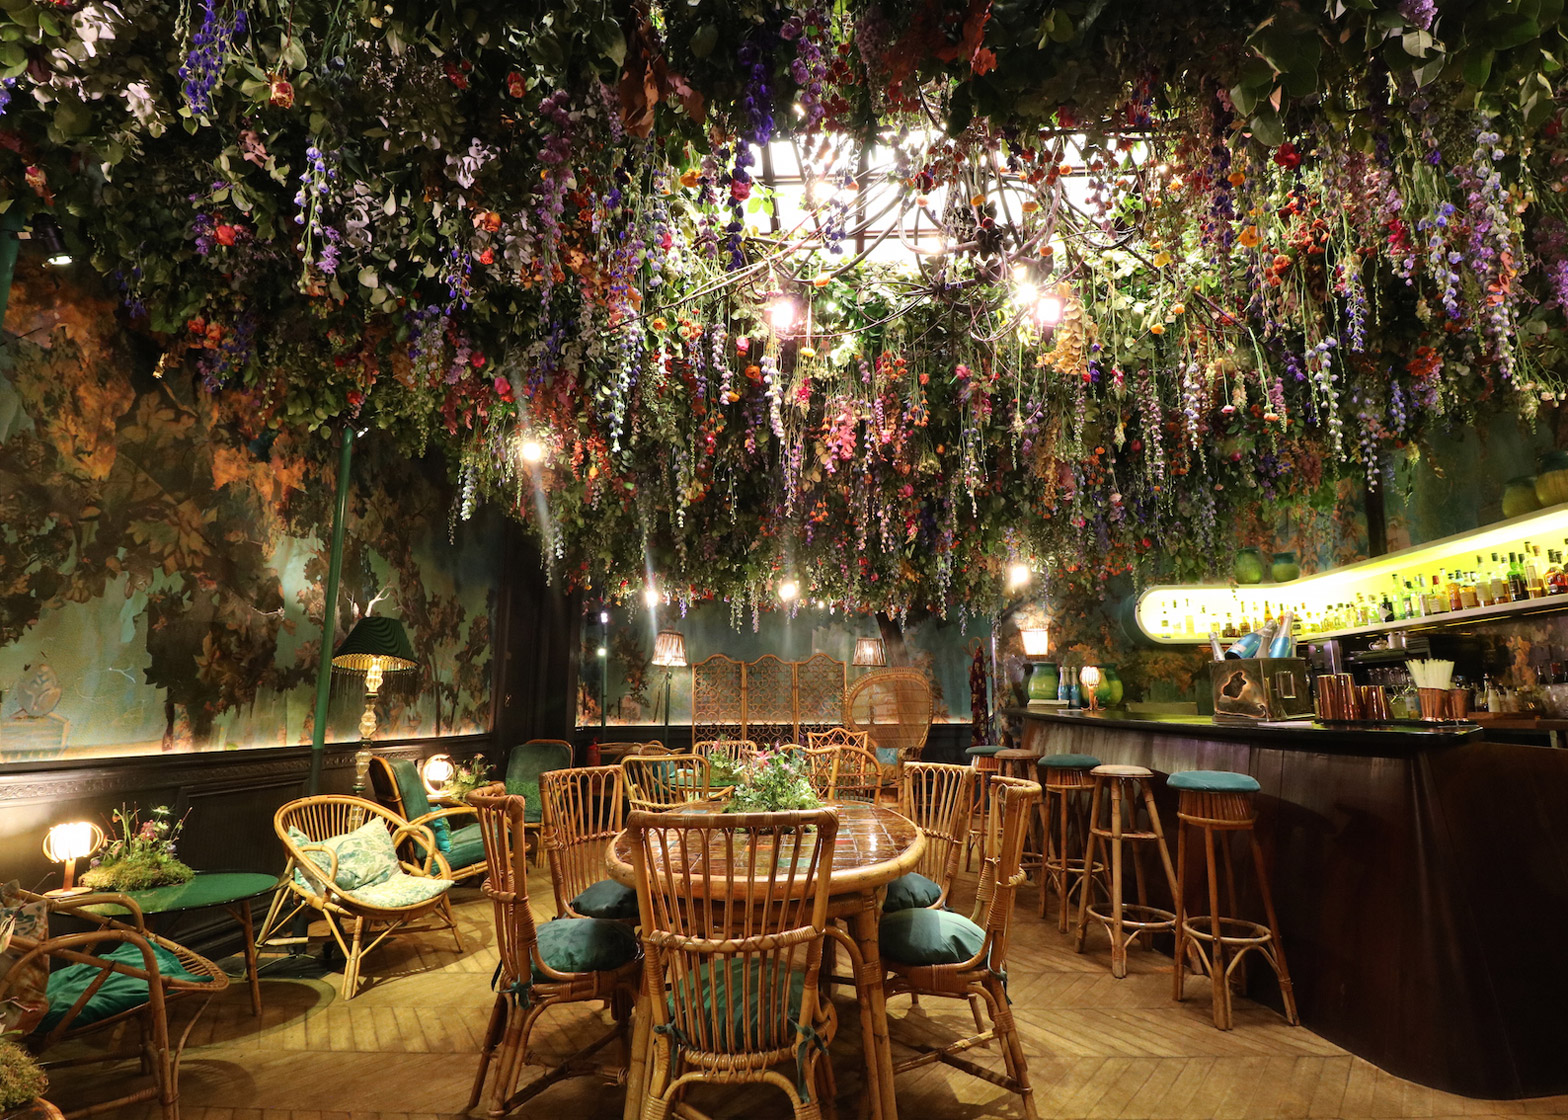 Sketch restaurant filled with floral installations for Flower Show